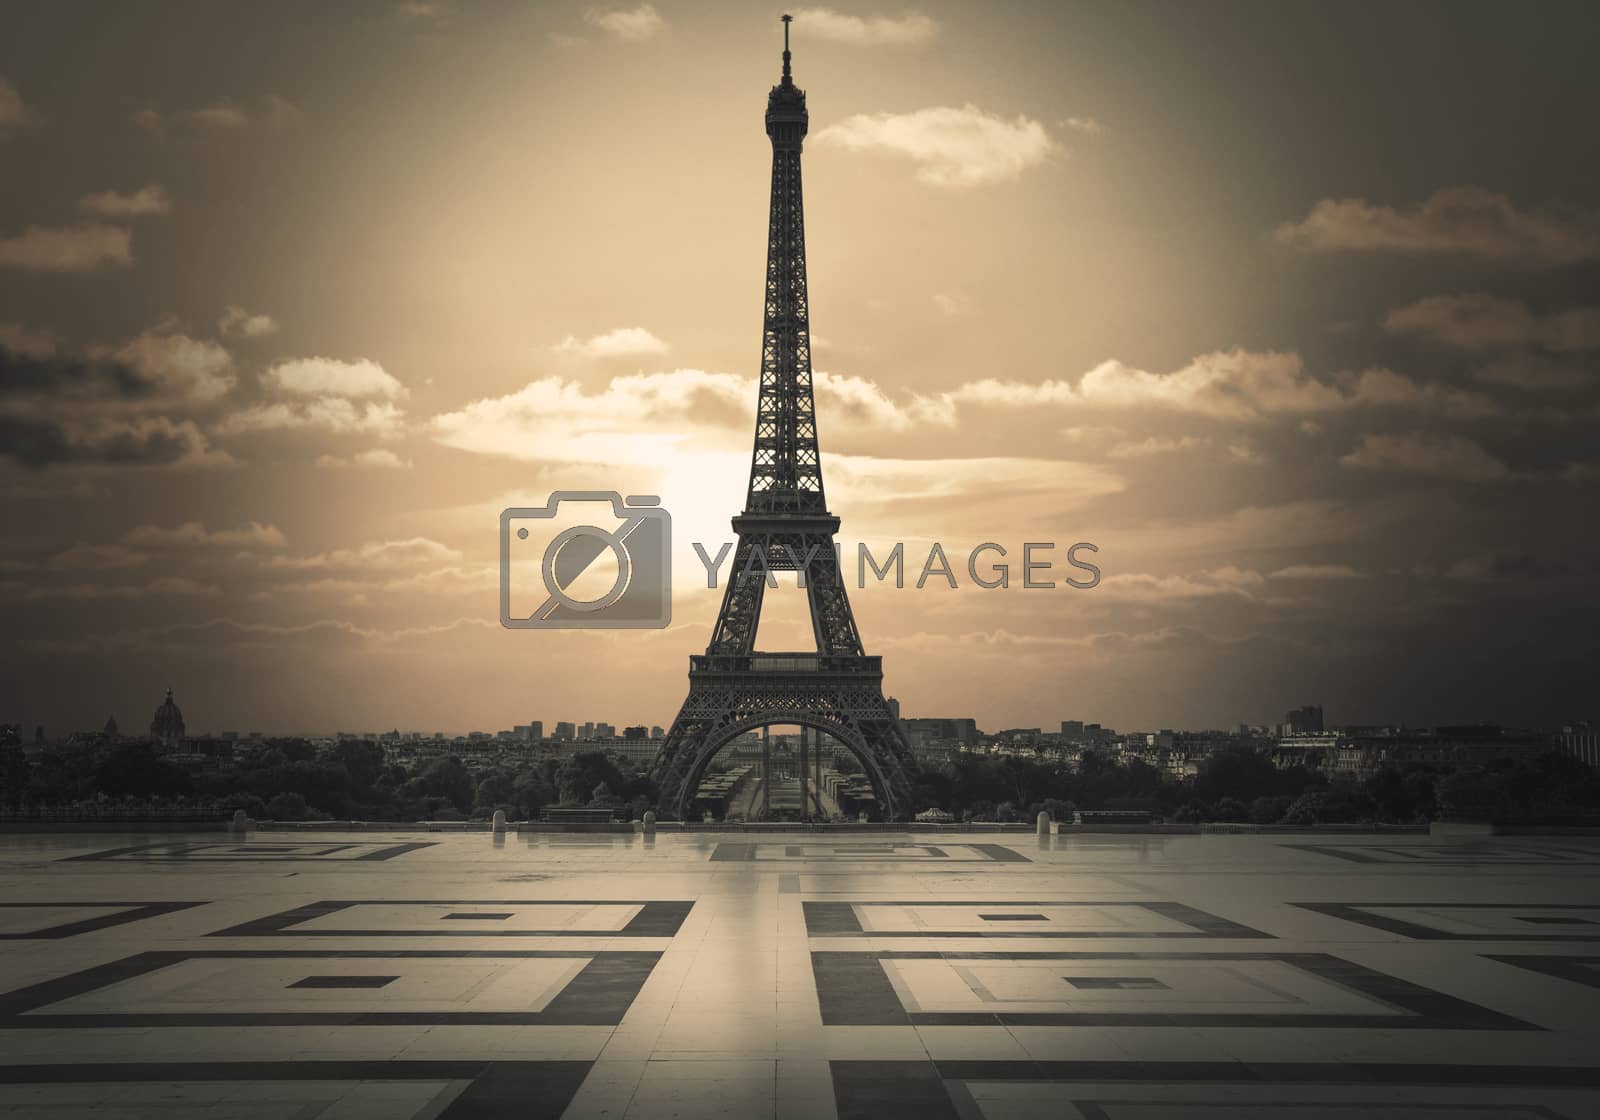 Royalty free image of sunset at trocadero with Eiffel Tower by photobeps